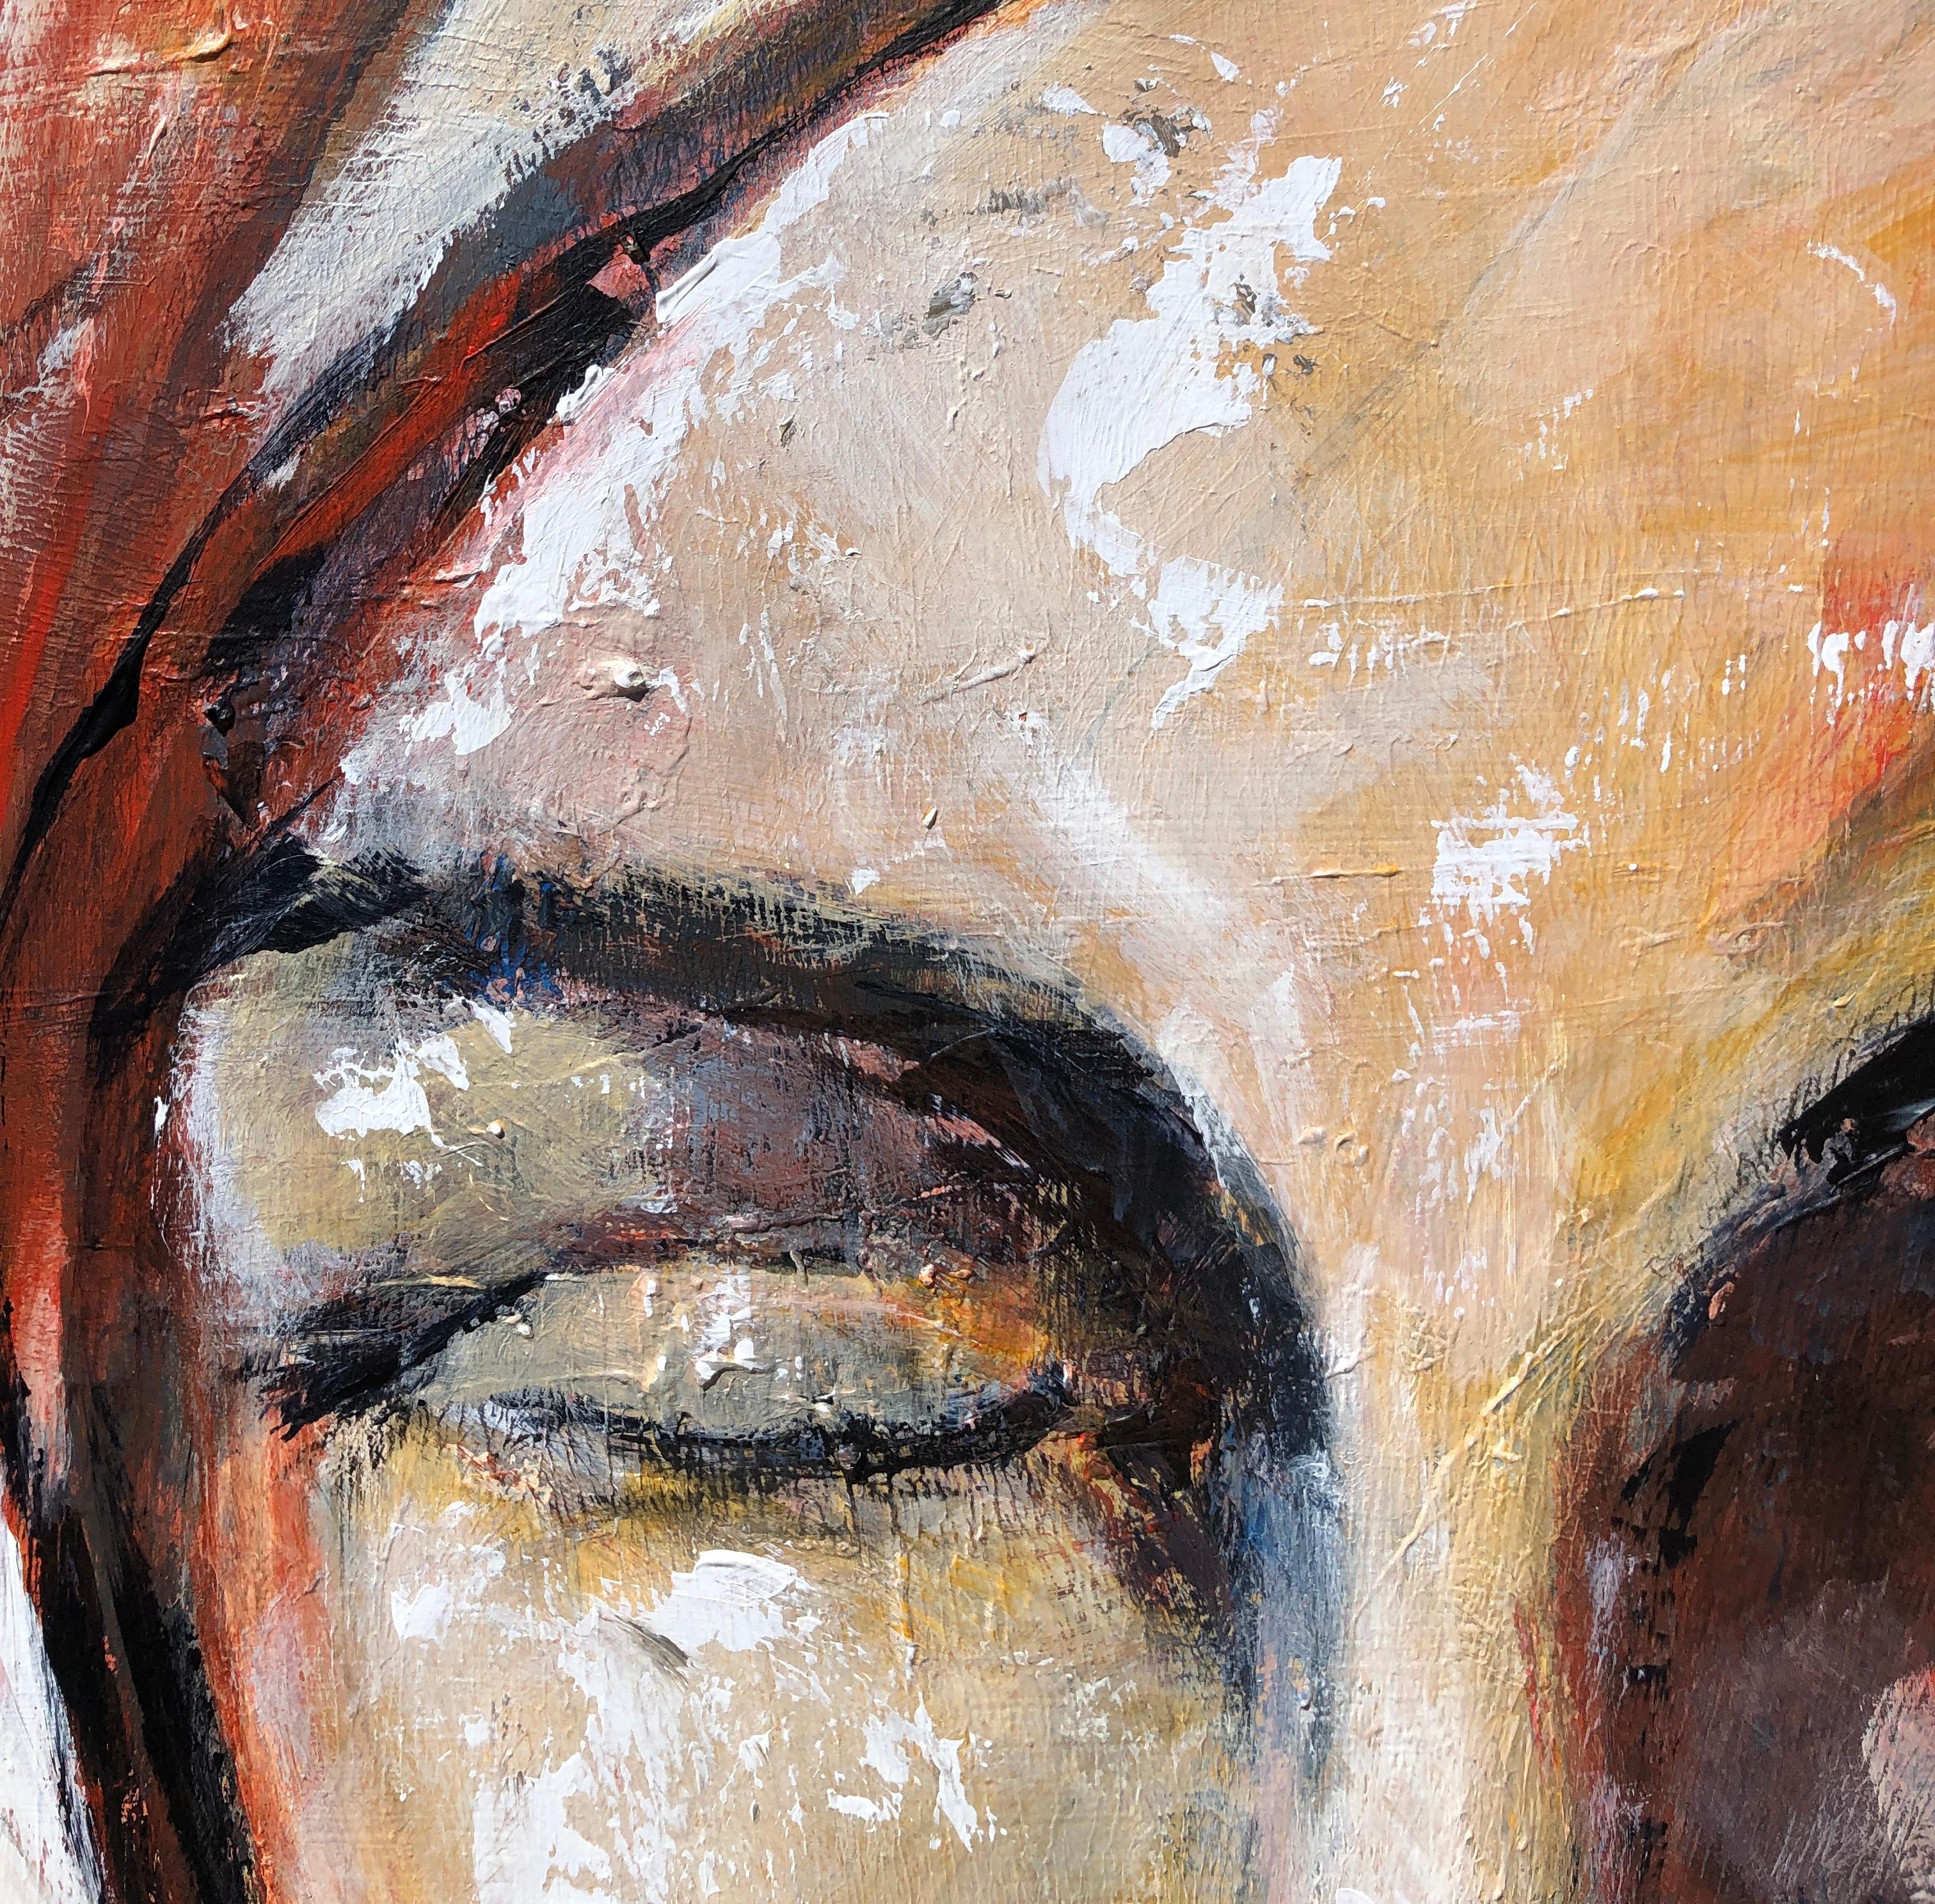 <p>Artist Comments<br>Artist Sharon Sieben presents an expressive portrait of a woman in warm tones of red, maroon, beige, and ochre. With her eyes closed and head tilted forward, she stills and gathers herself in silent meditation. 